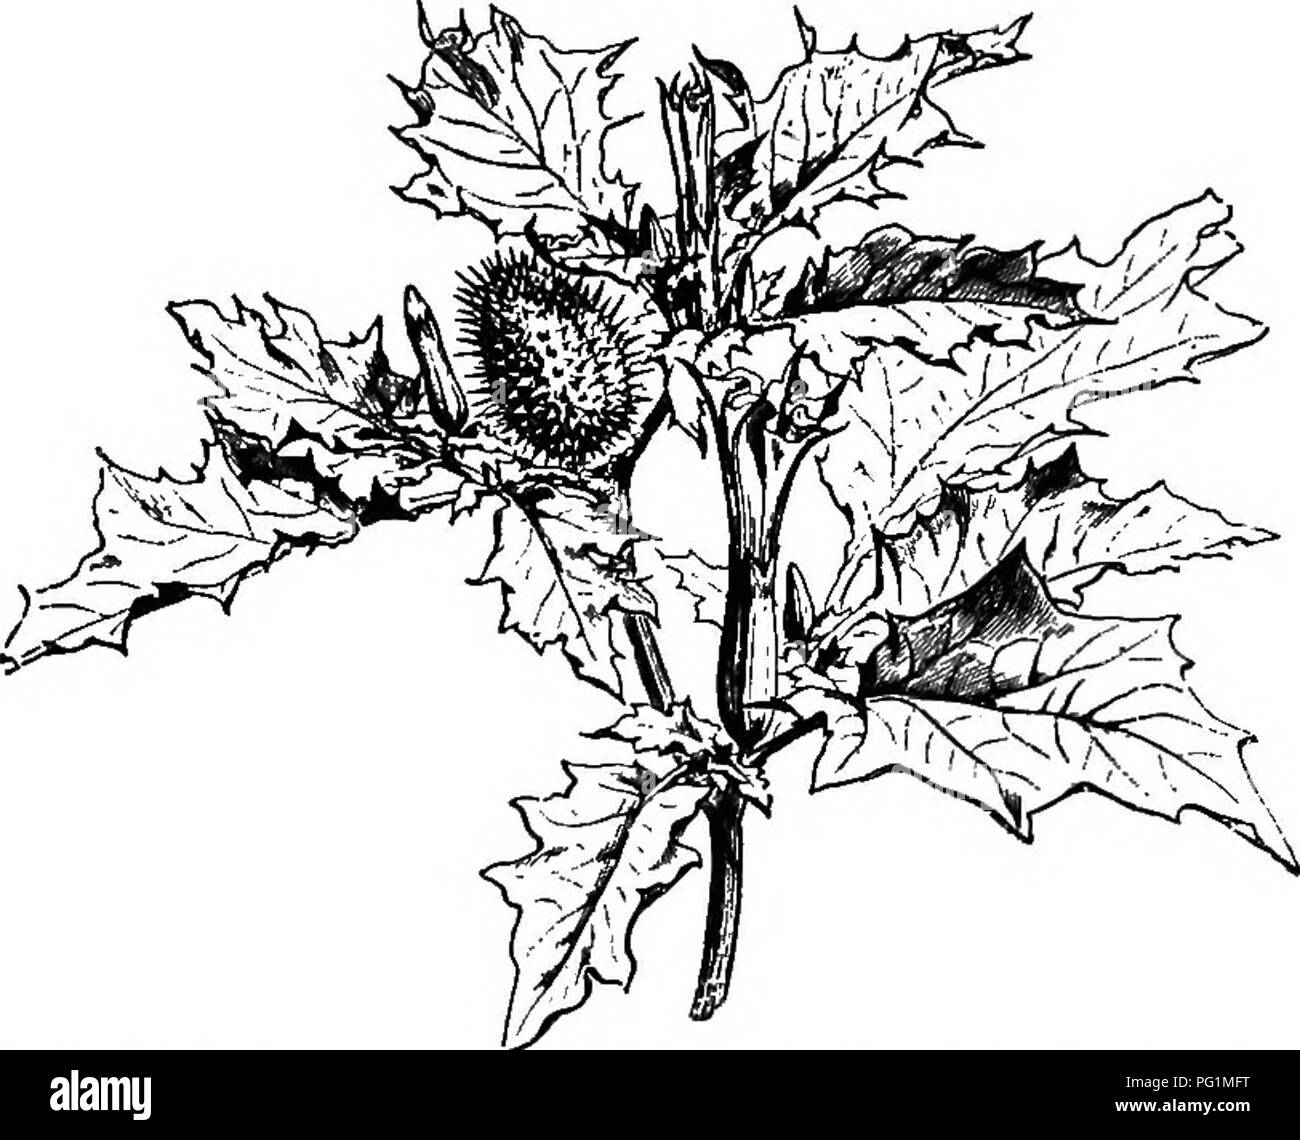 Thorn apple Black and White Stock Photos & Images - Alamy